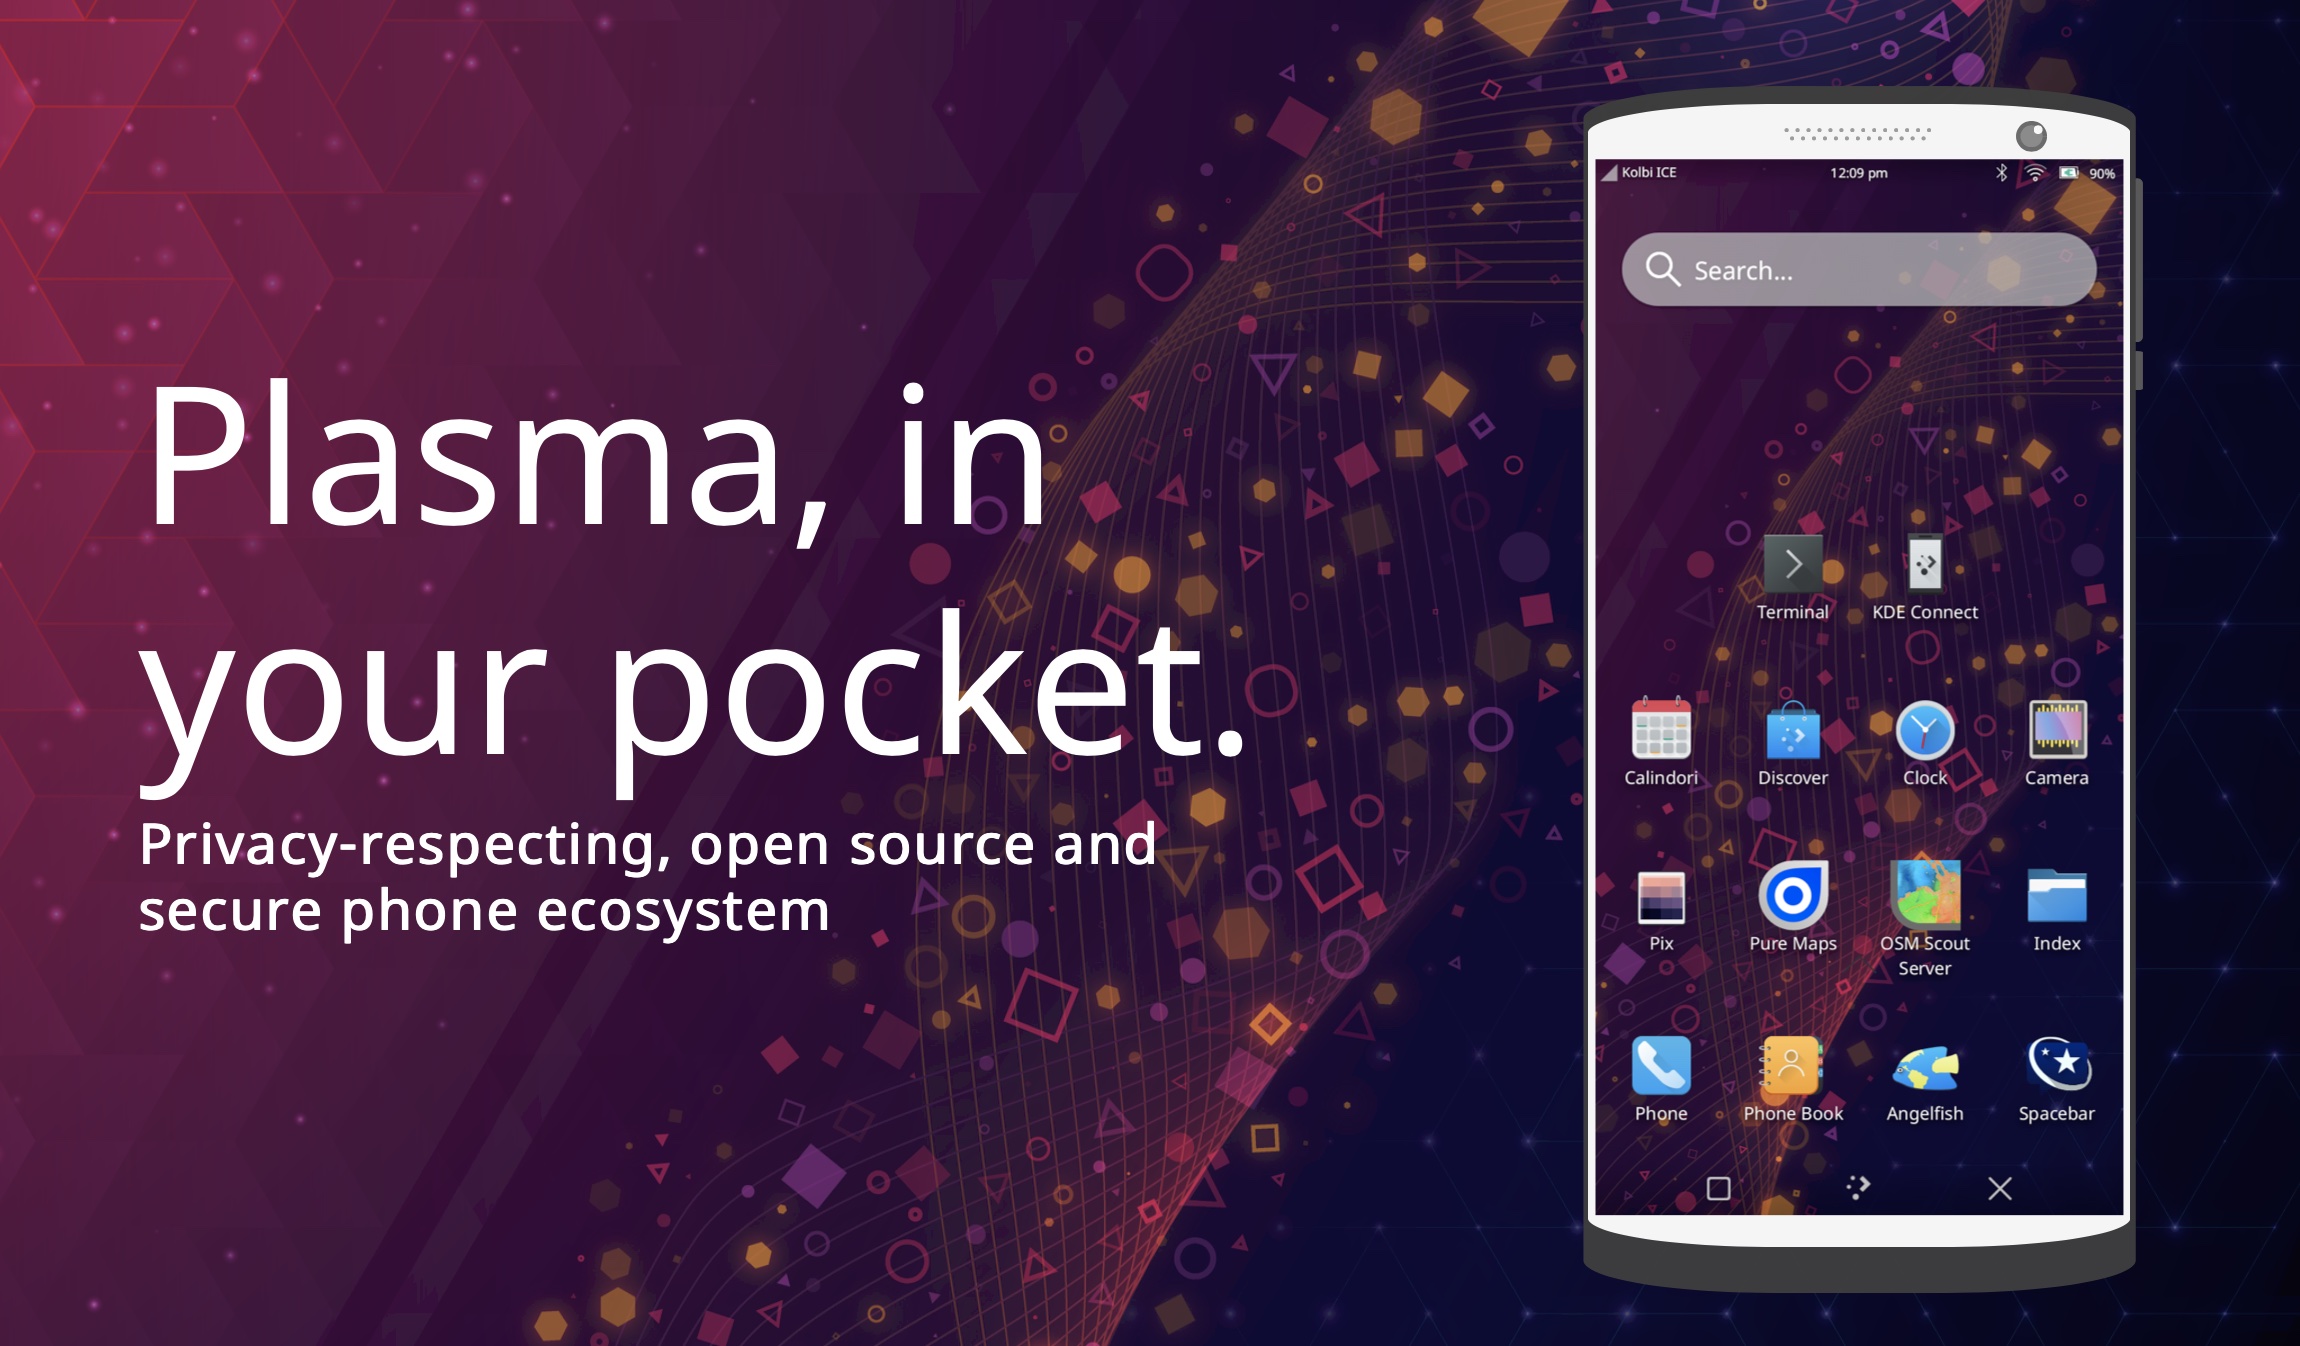 Plasma Mobile Gear 21.08 Improves the Clock, Weather, Kasts, and Spacebar Apps